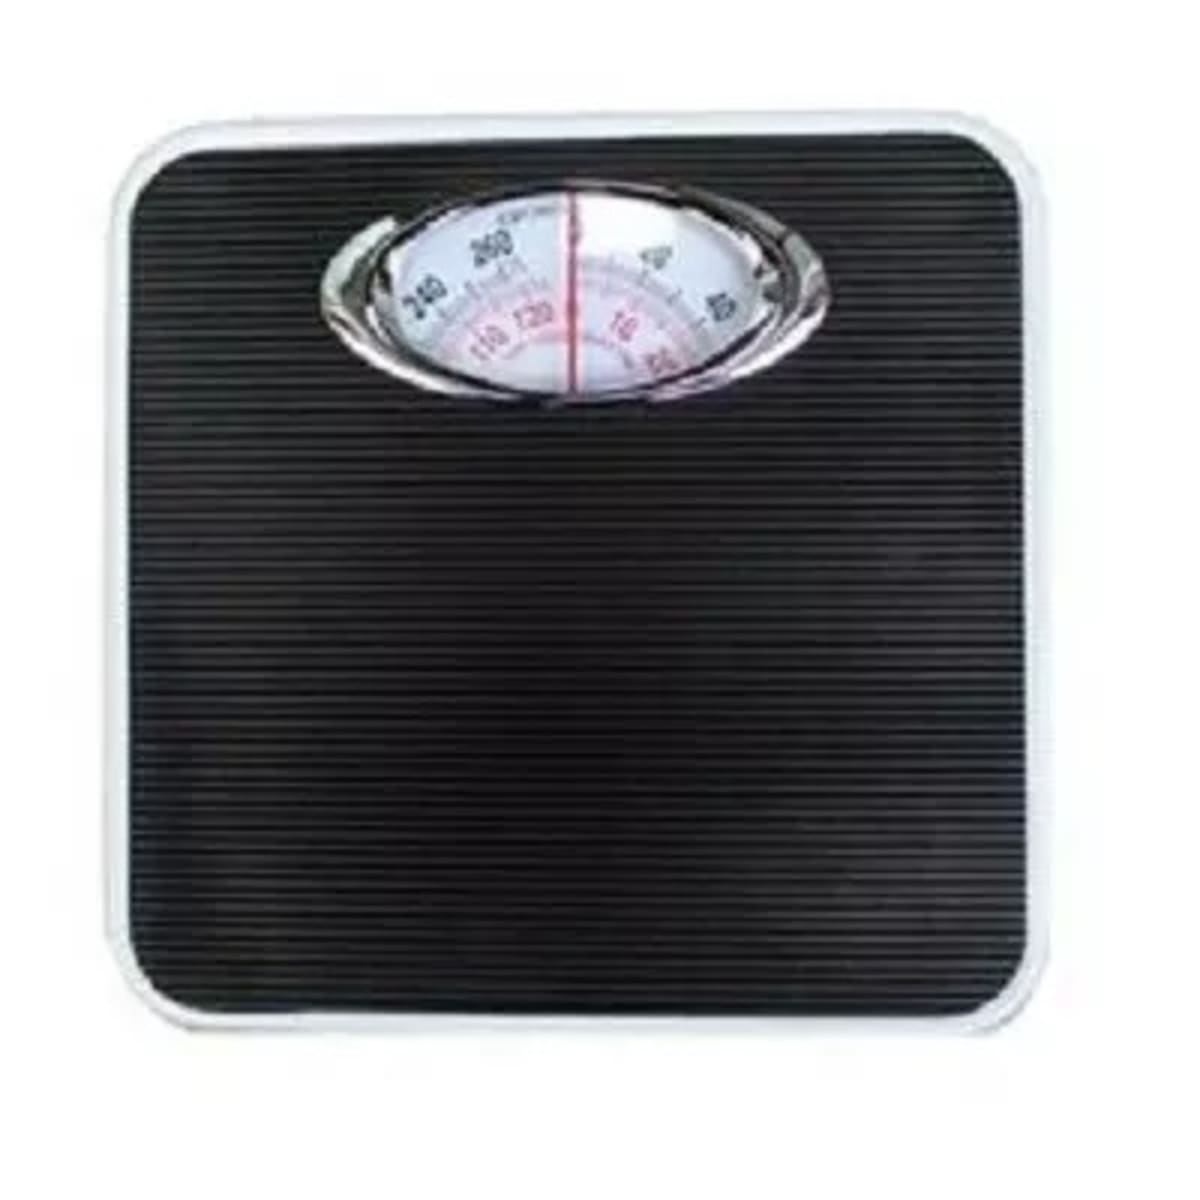 LRBBH Mechanical Bathroom Scales, Professional Analog Dials, Non-Slip –  BABACLICK